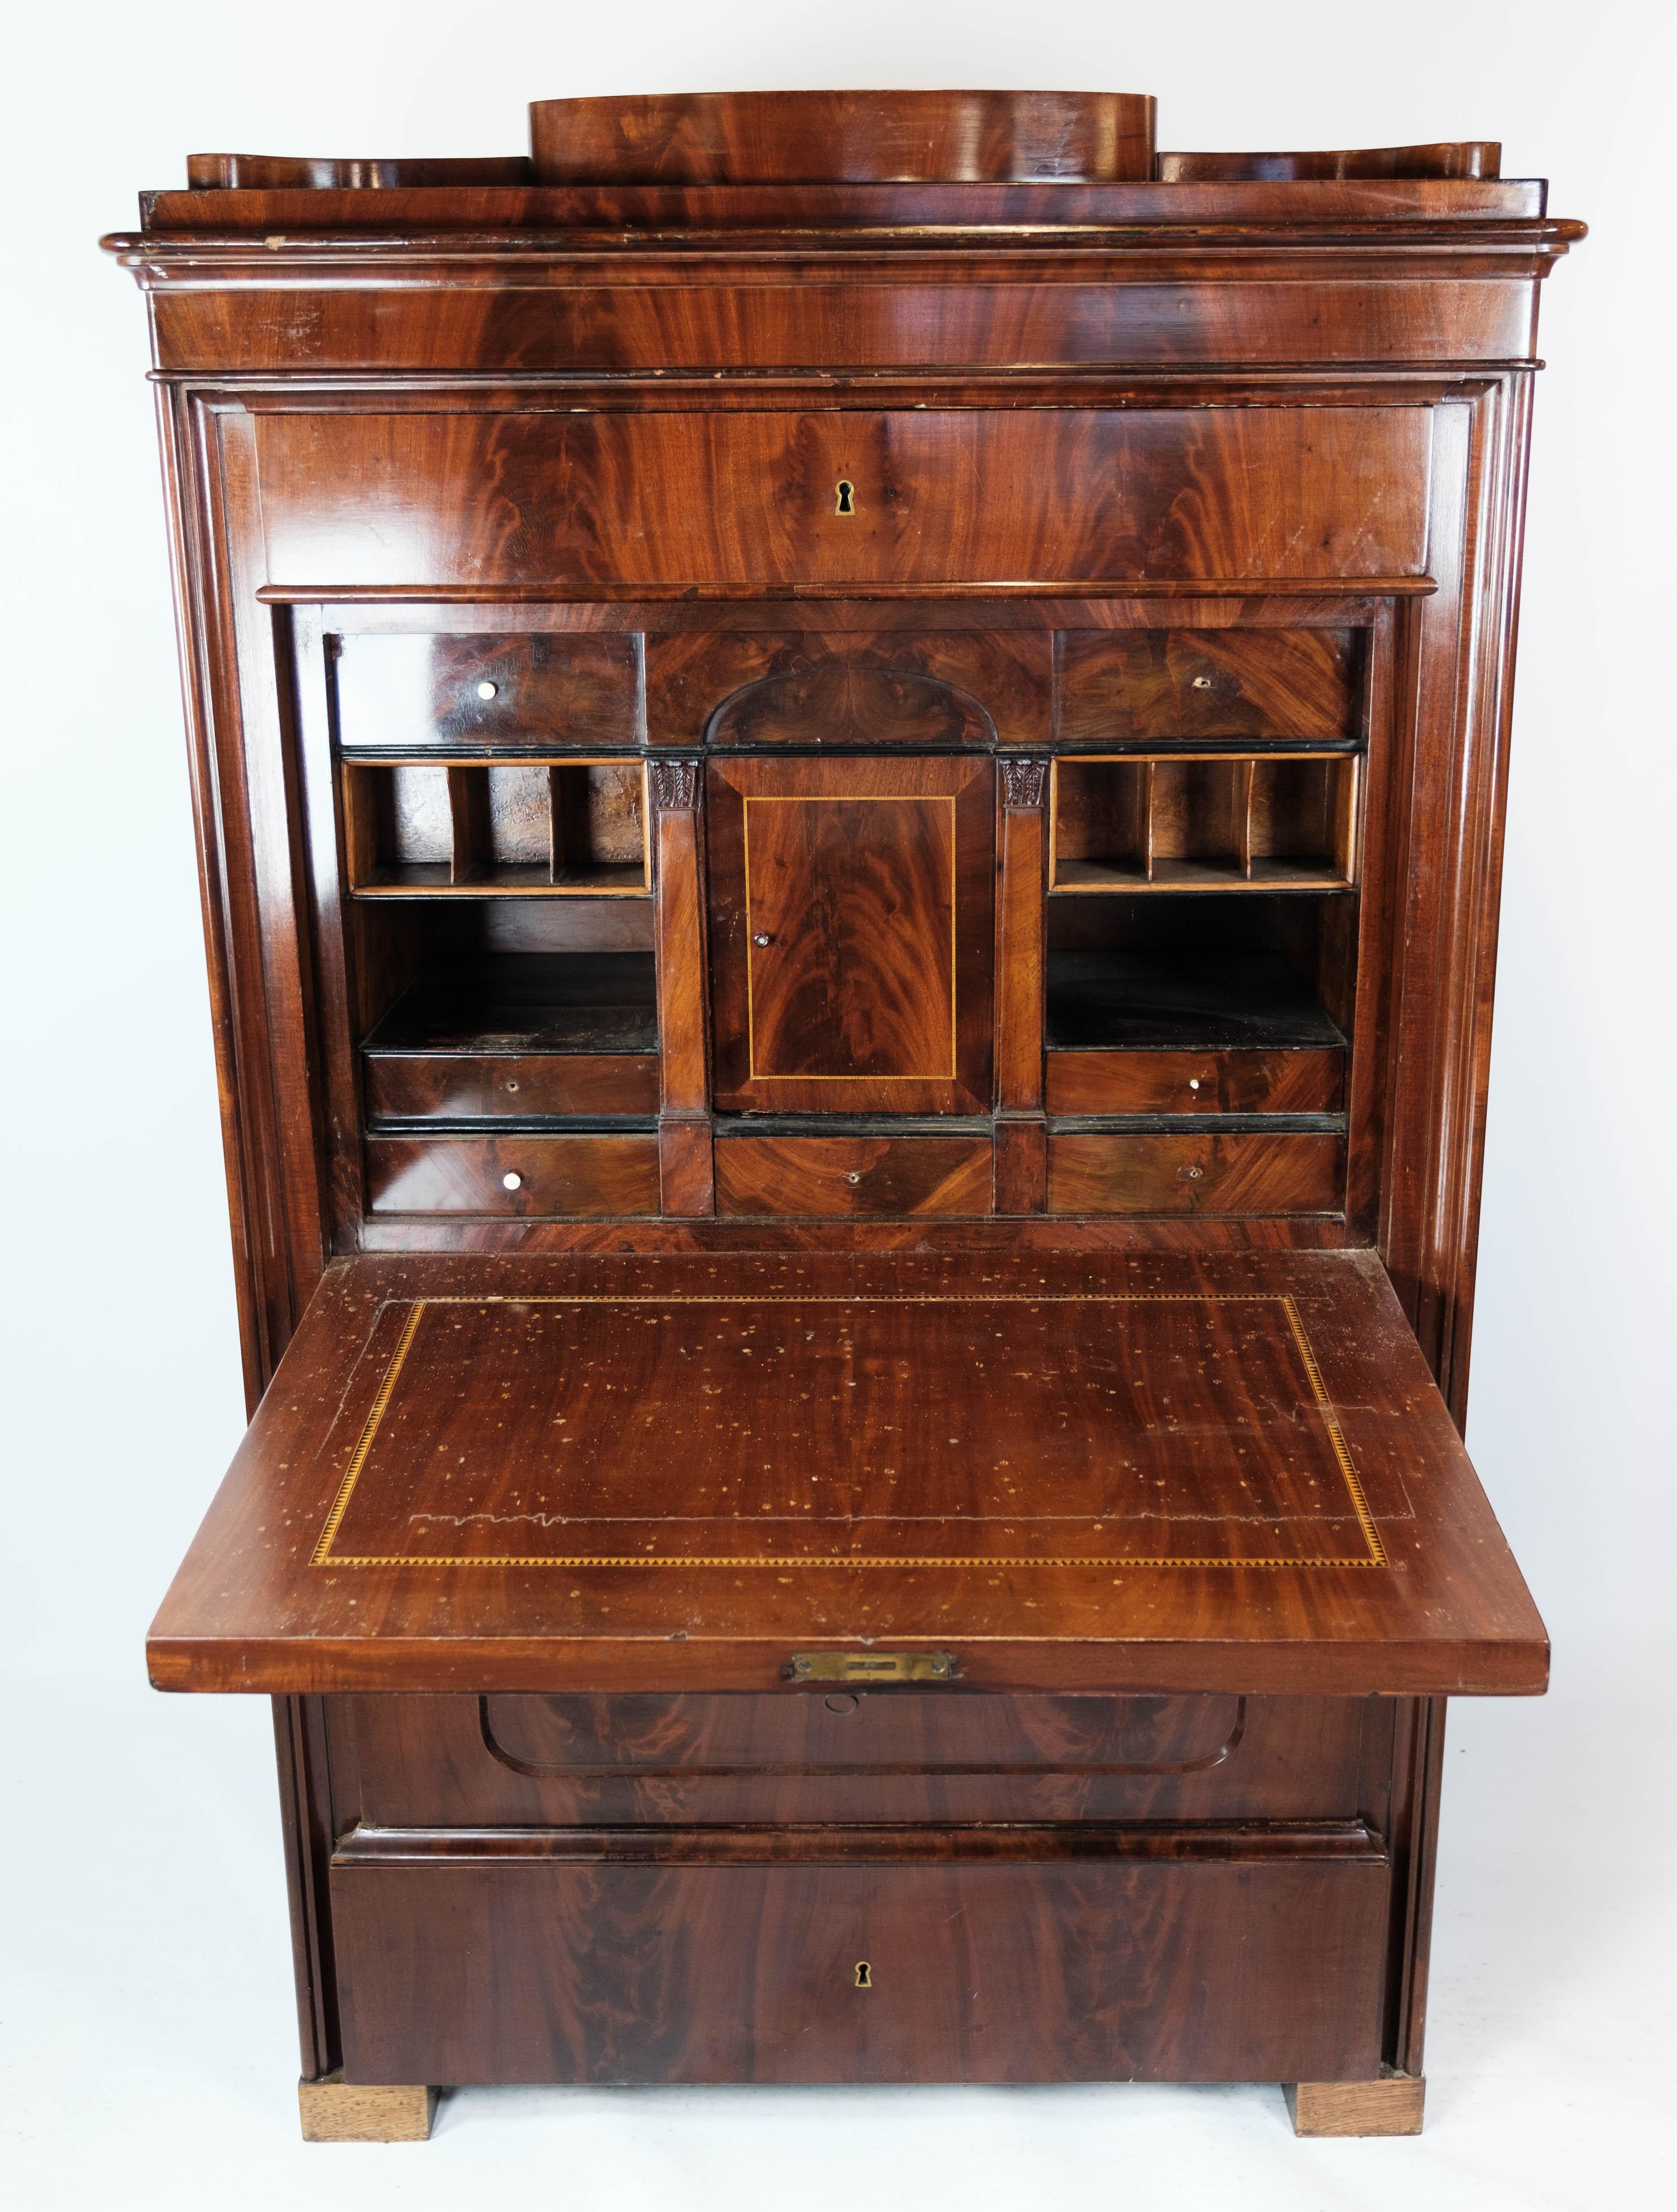 Secretary Made In Mahogany WQith Inlaid Wood From 1840s In Good Condition For Sale In Lejre, DK